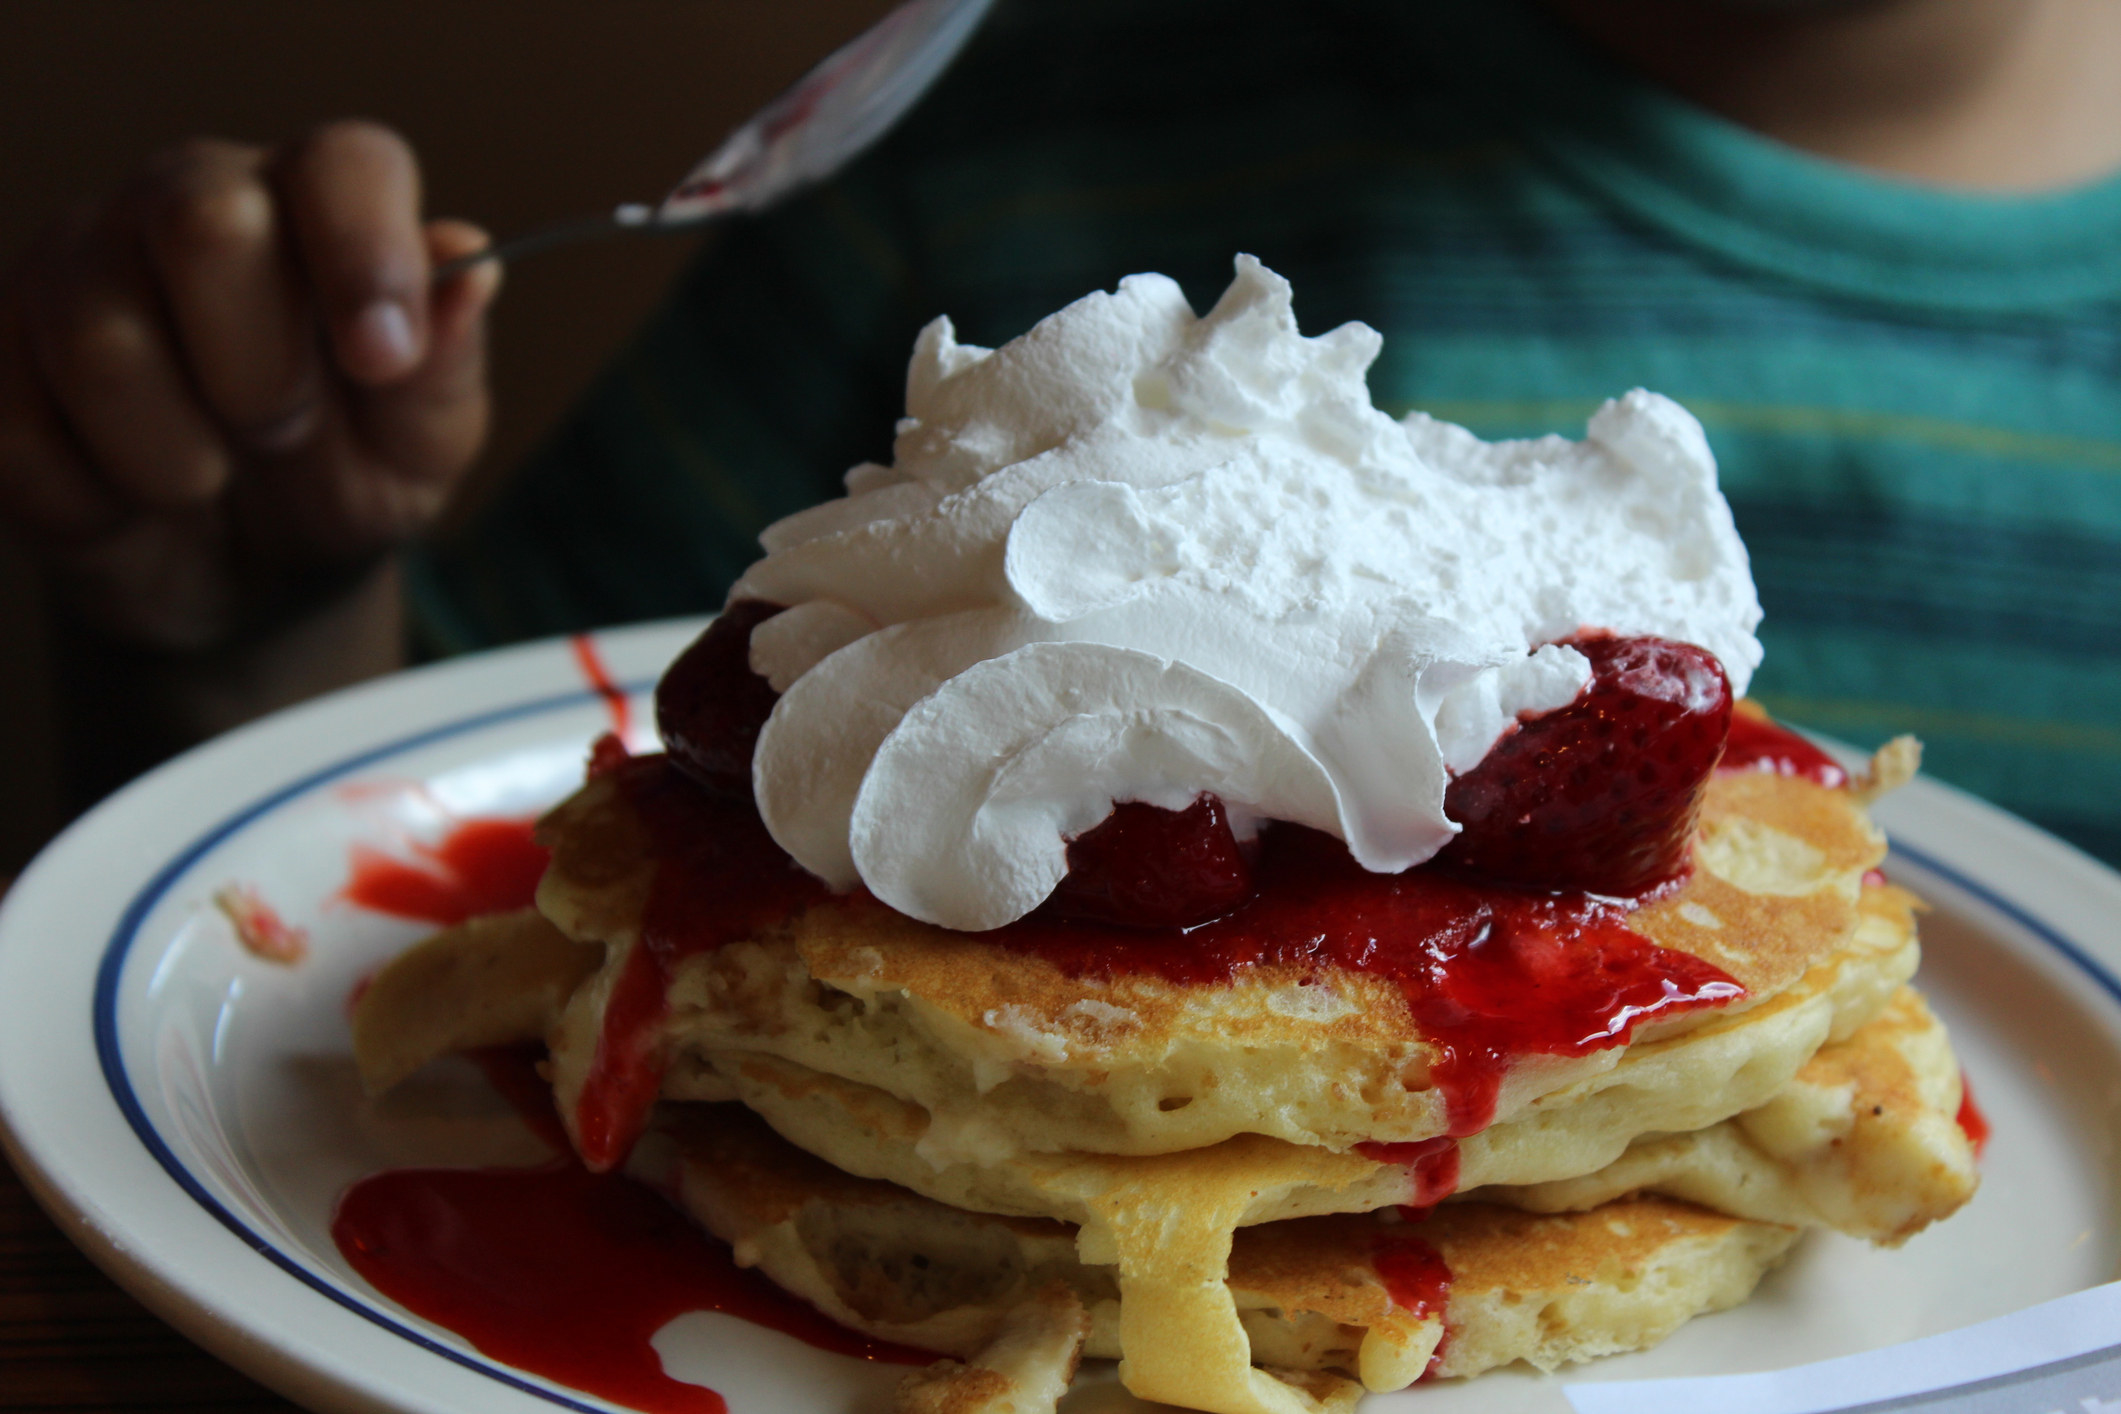 Pancakes topped with strawberries and whipped cream.